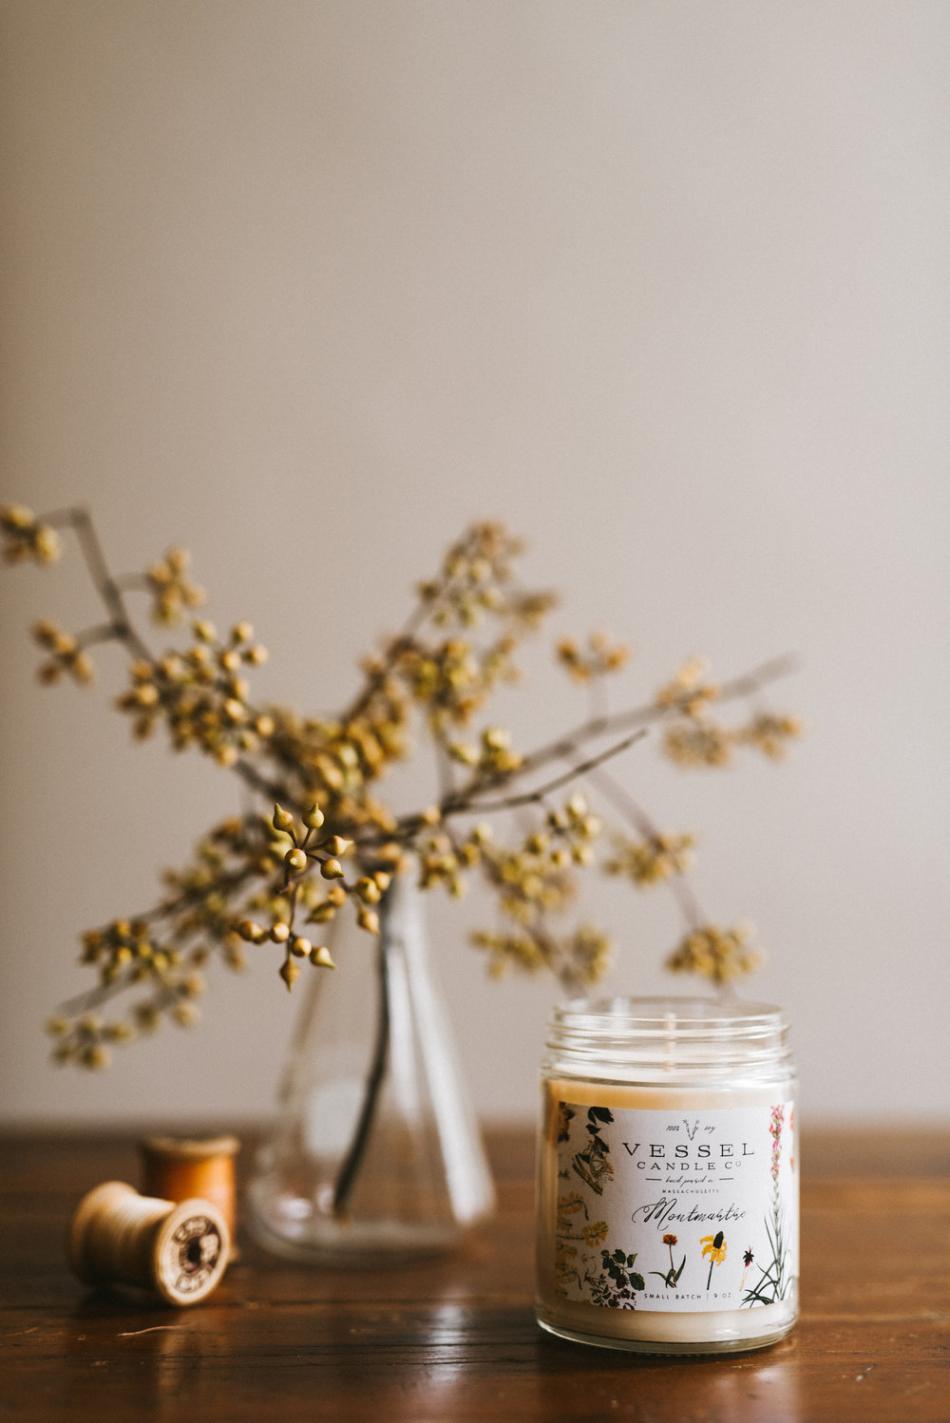 Vessel Candle Co 